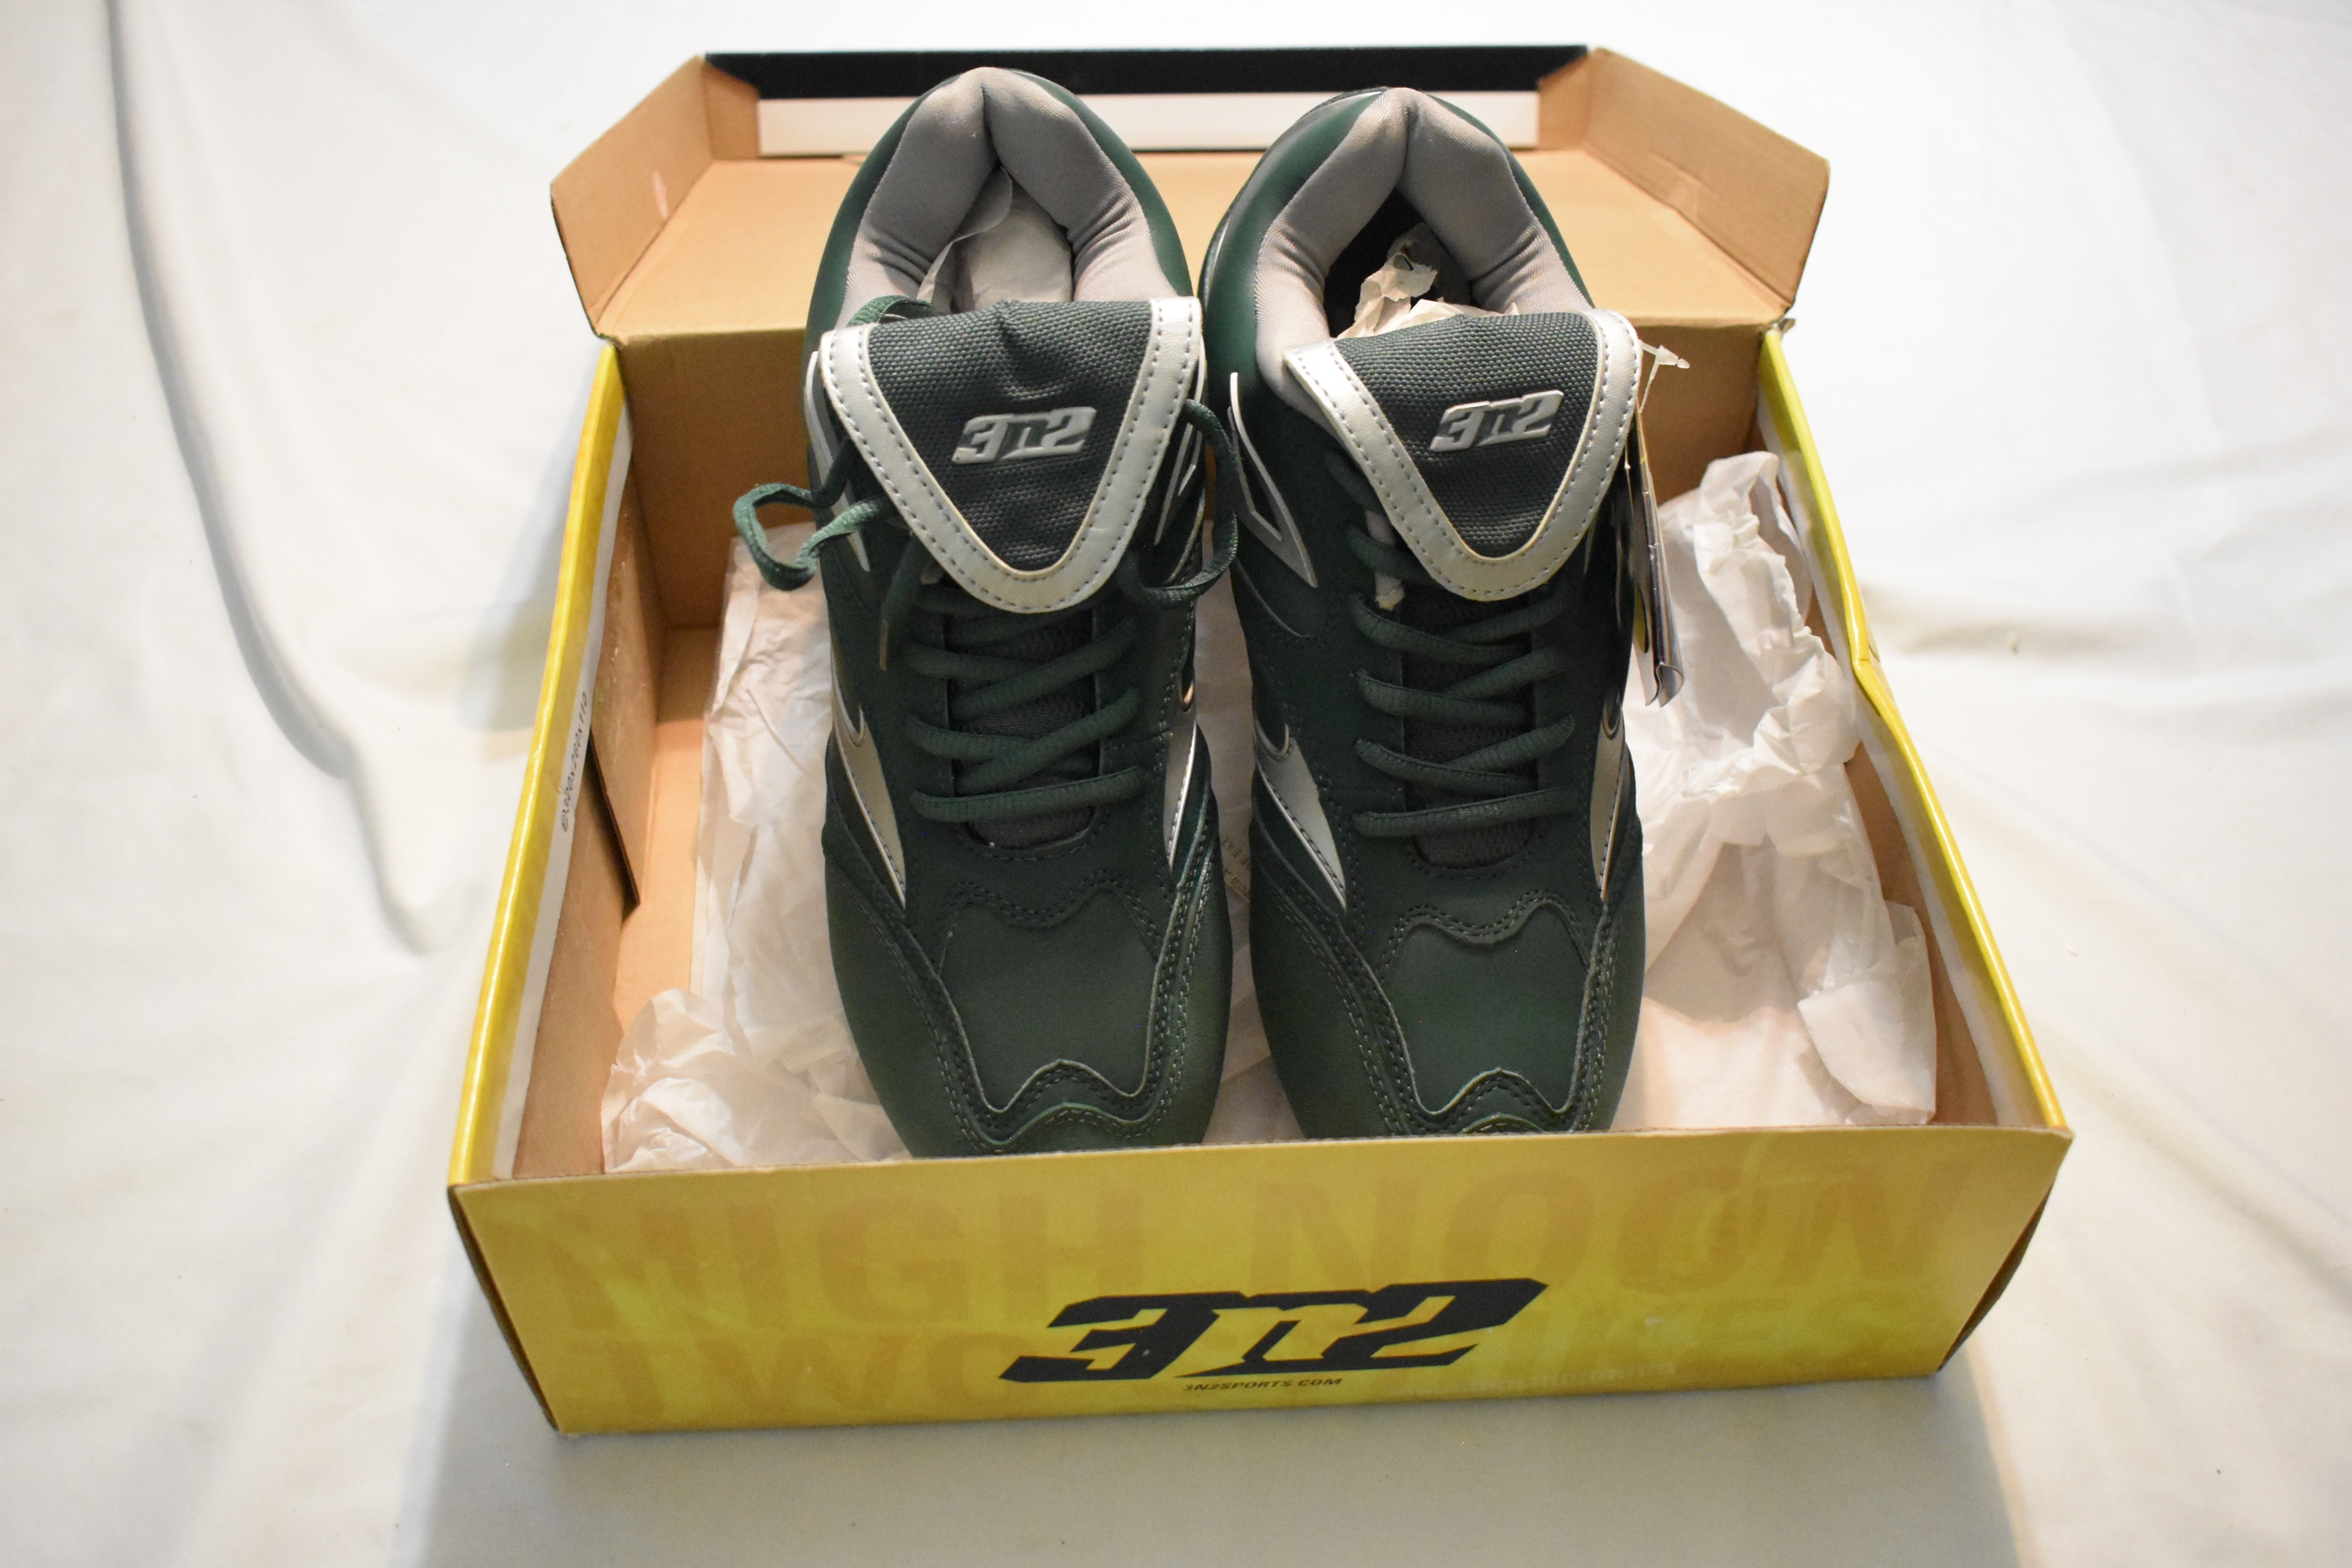 NEW - 3N2 Showtime Low Metal Cleats, Forest Green / Silver, Size 8.0 (Women's 9.0)